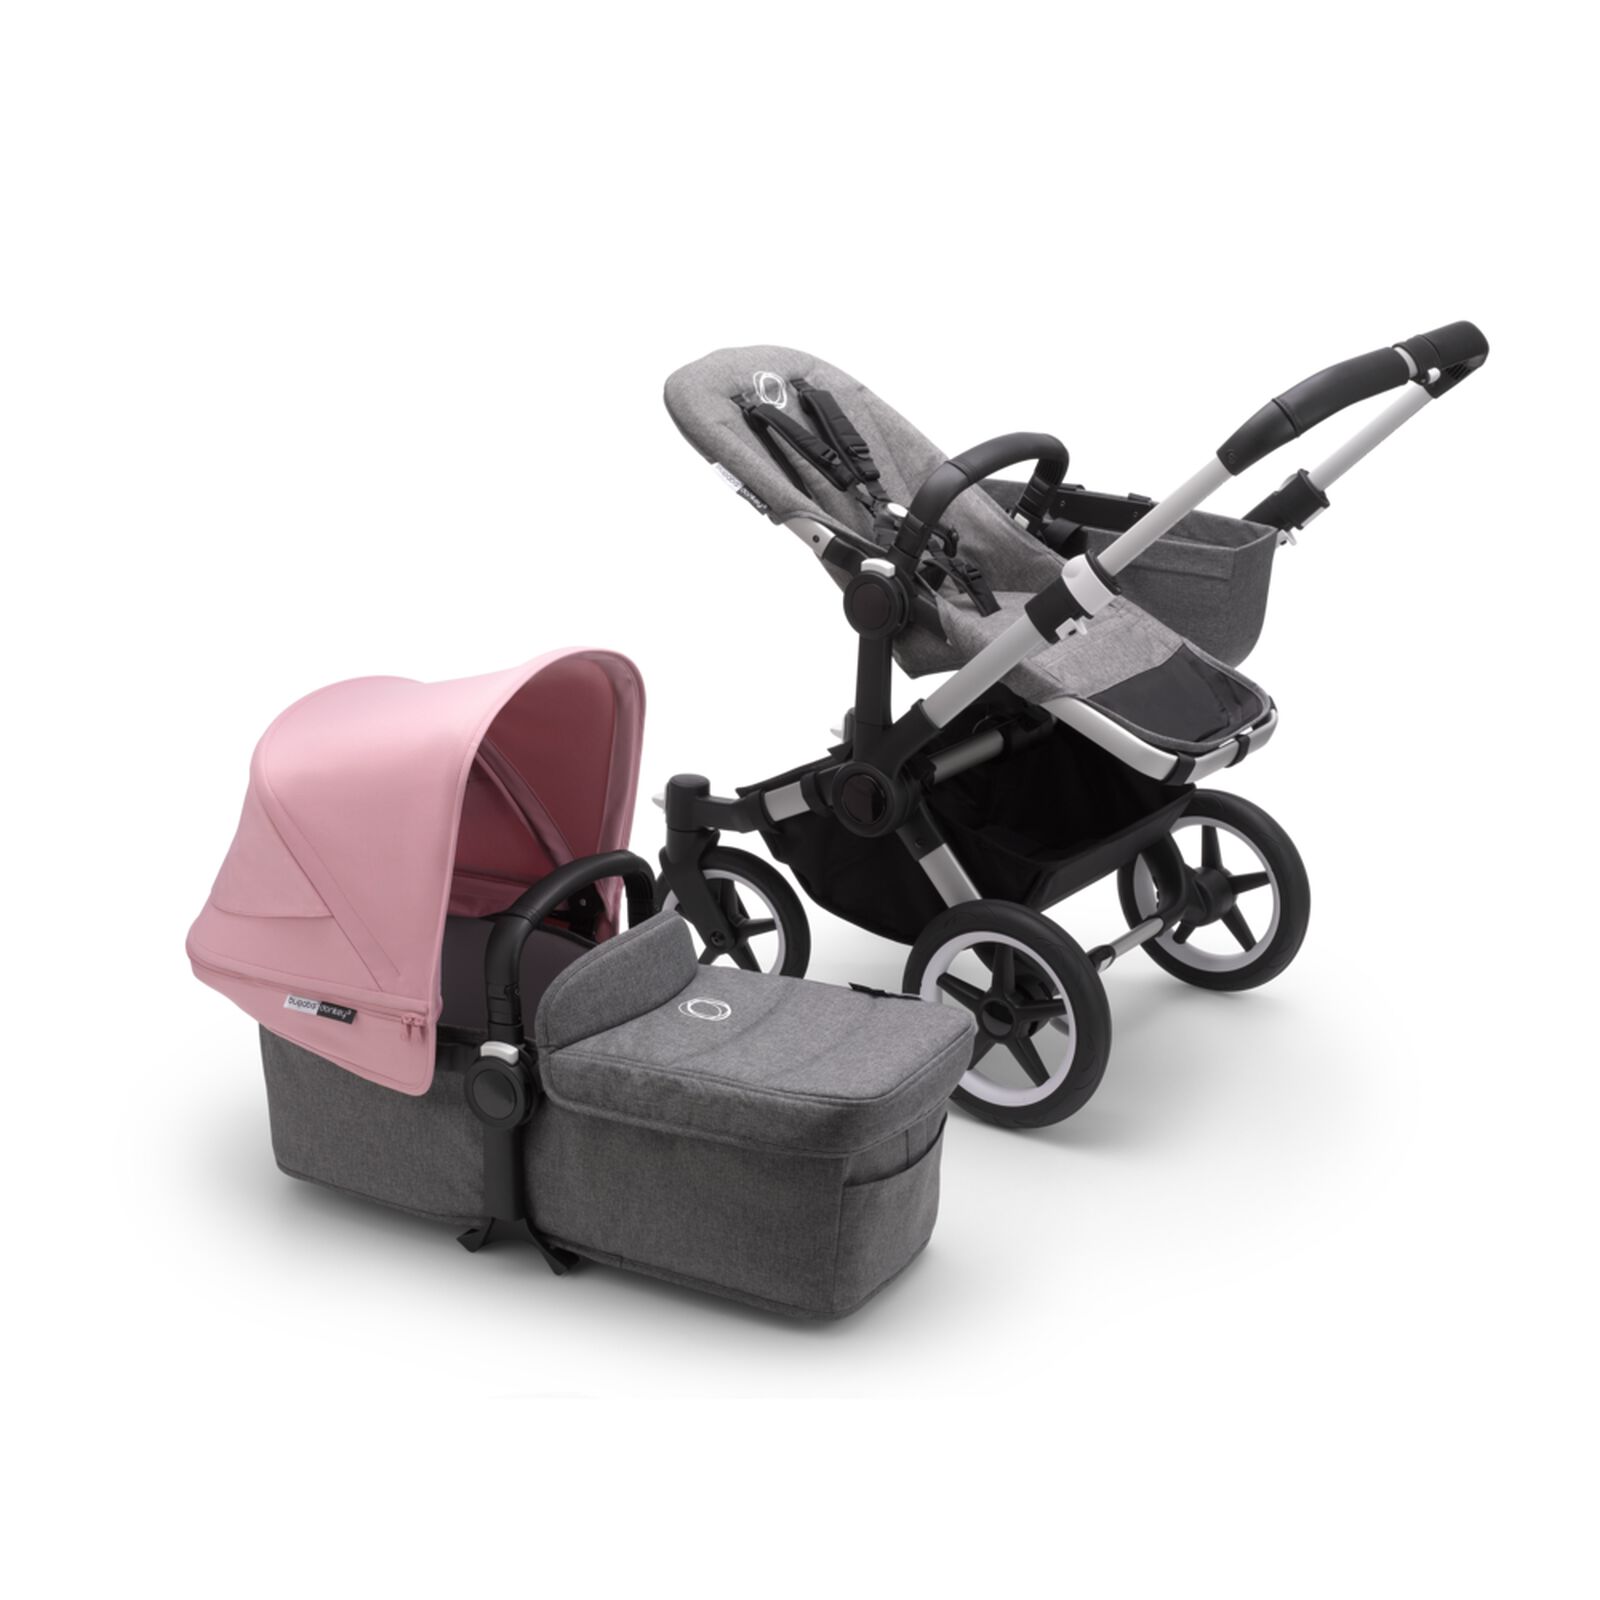 Bugaboo Donkey 3 Mono bassinet and seat stroller - View 9